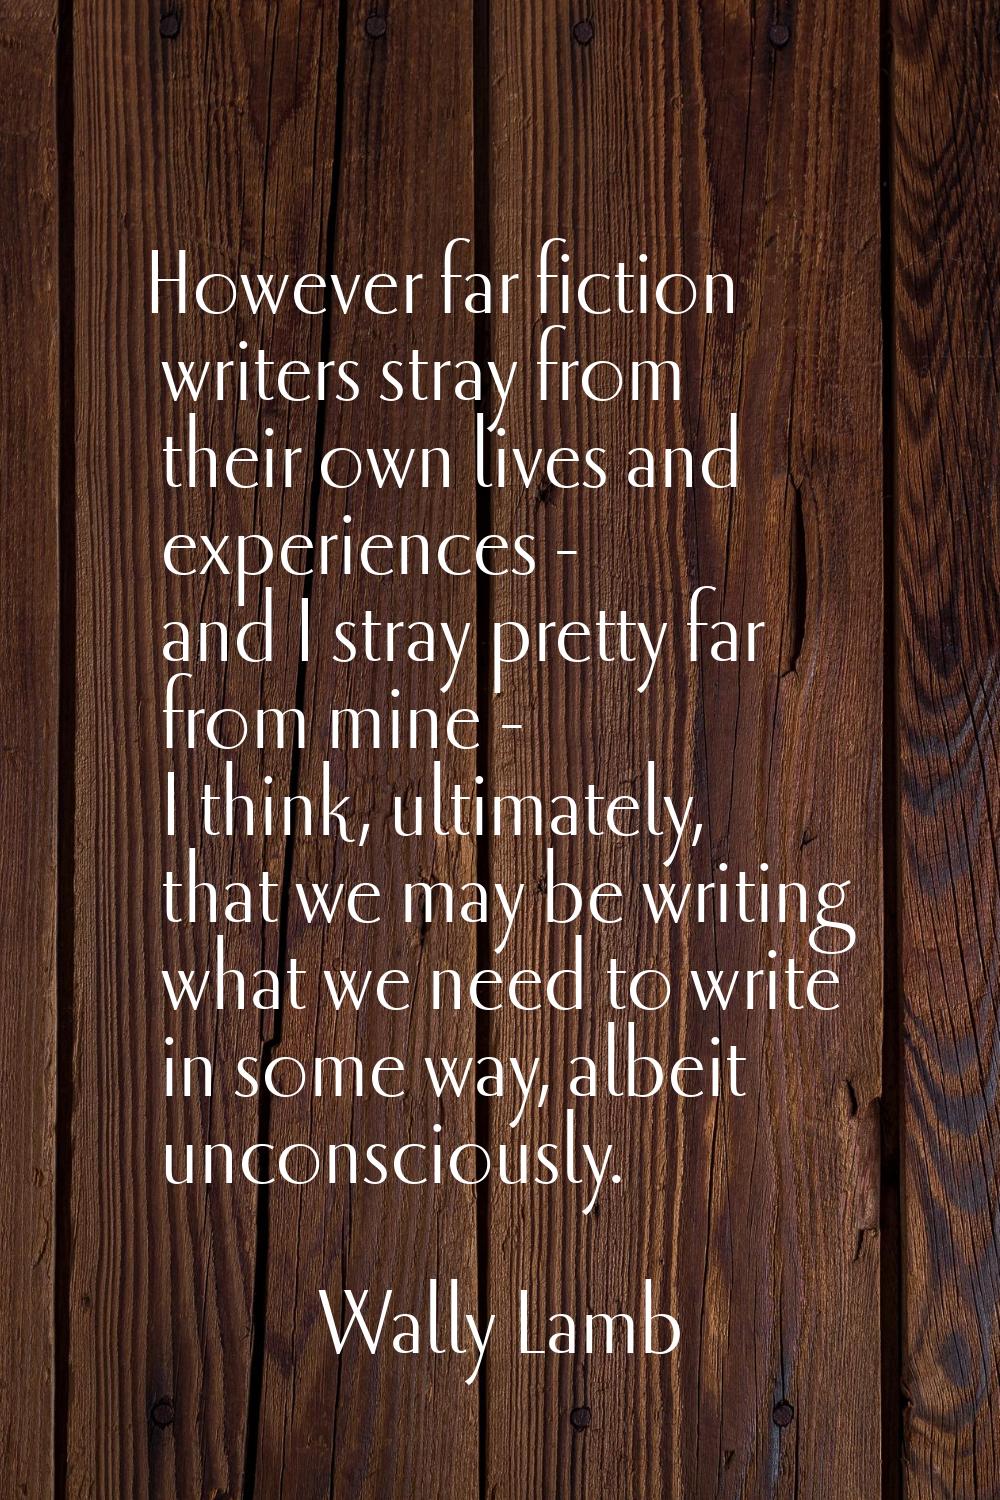 However far fiction writers stray from their own lives and experiences - and I stray pretty far fro